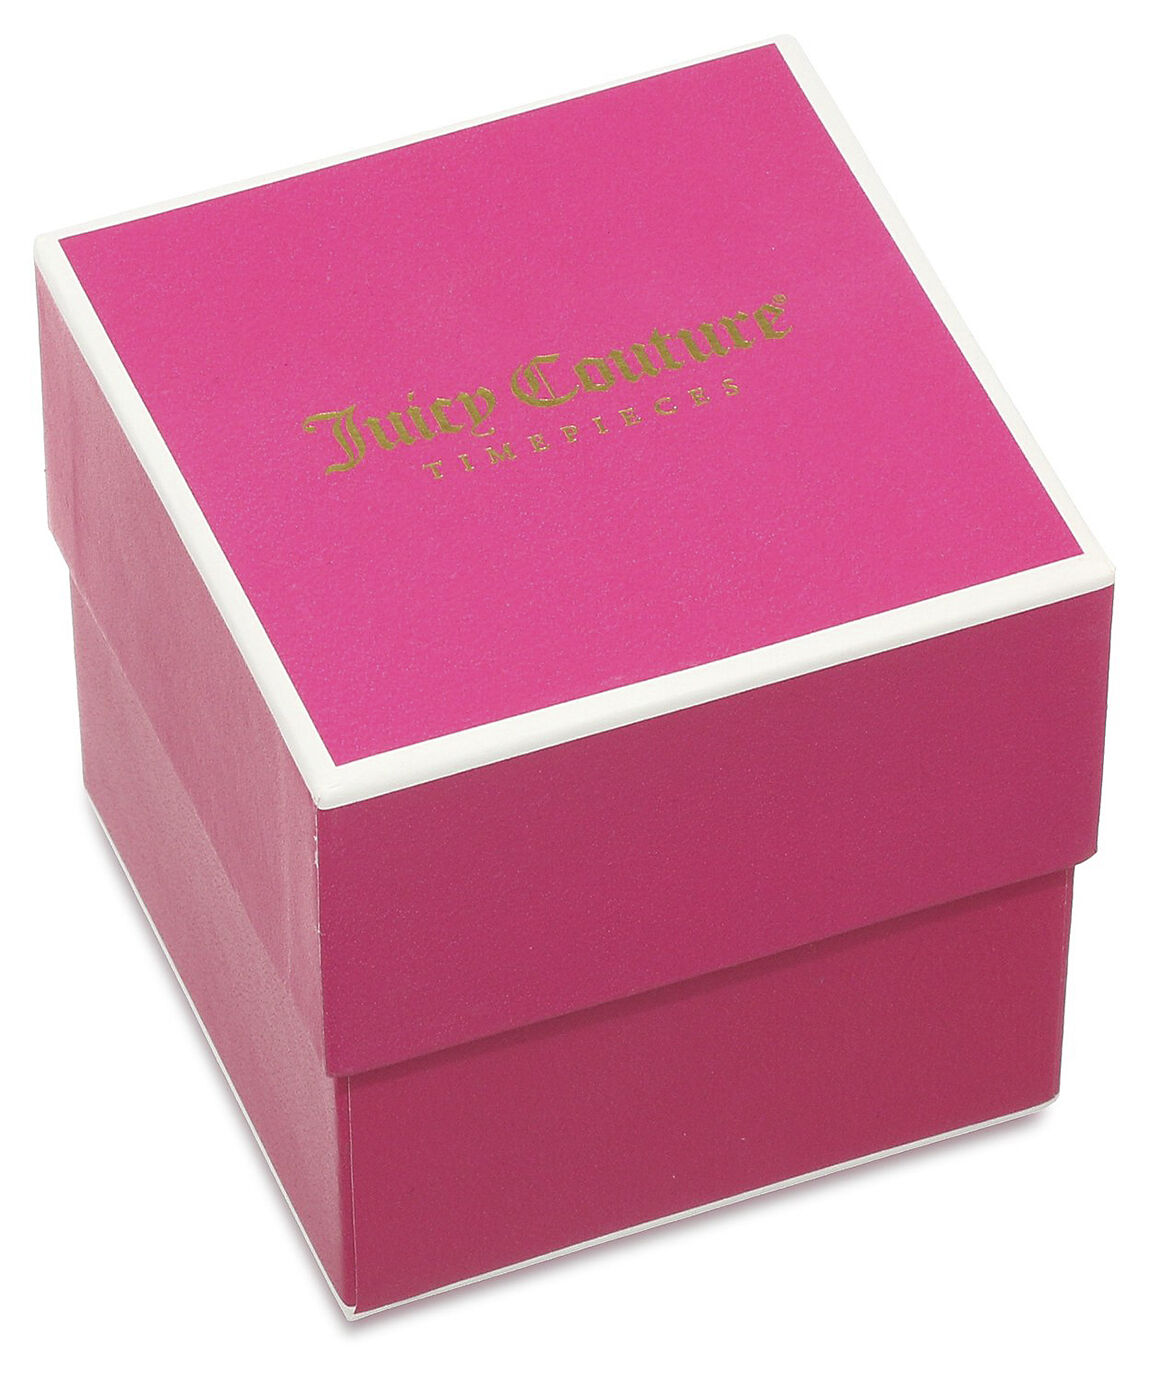 Juicy Couture Rich Girl Pink Neon Silicone Rubber Strap Silver Runway Watch